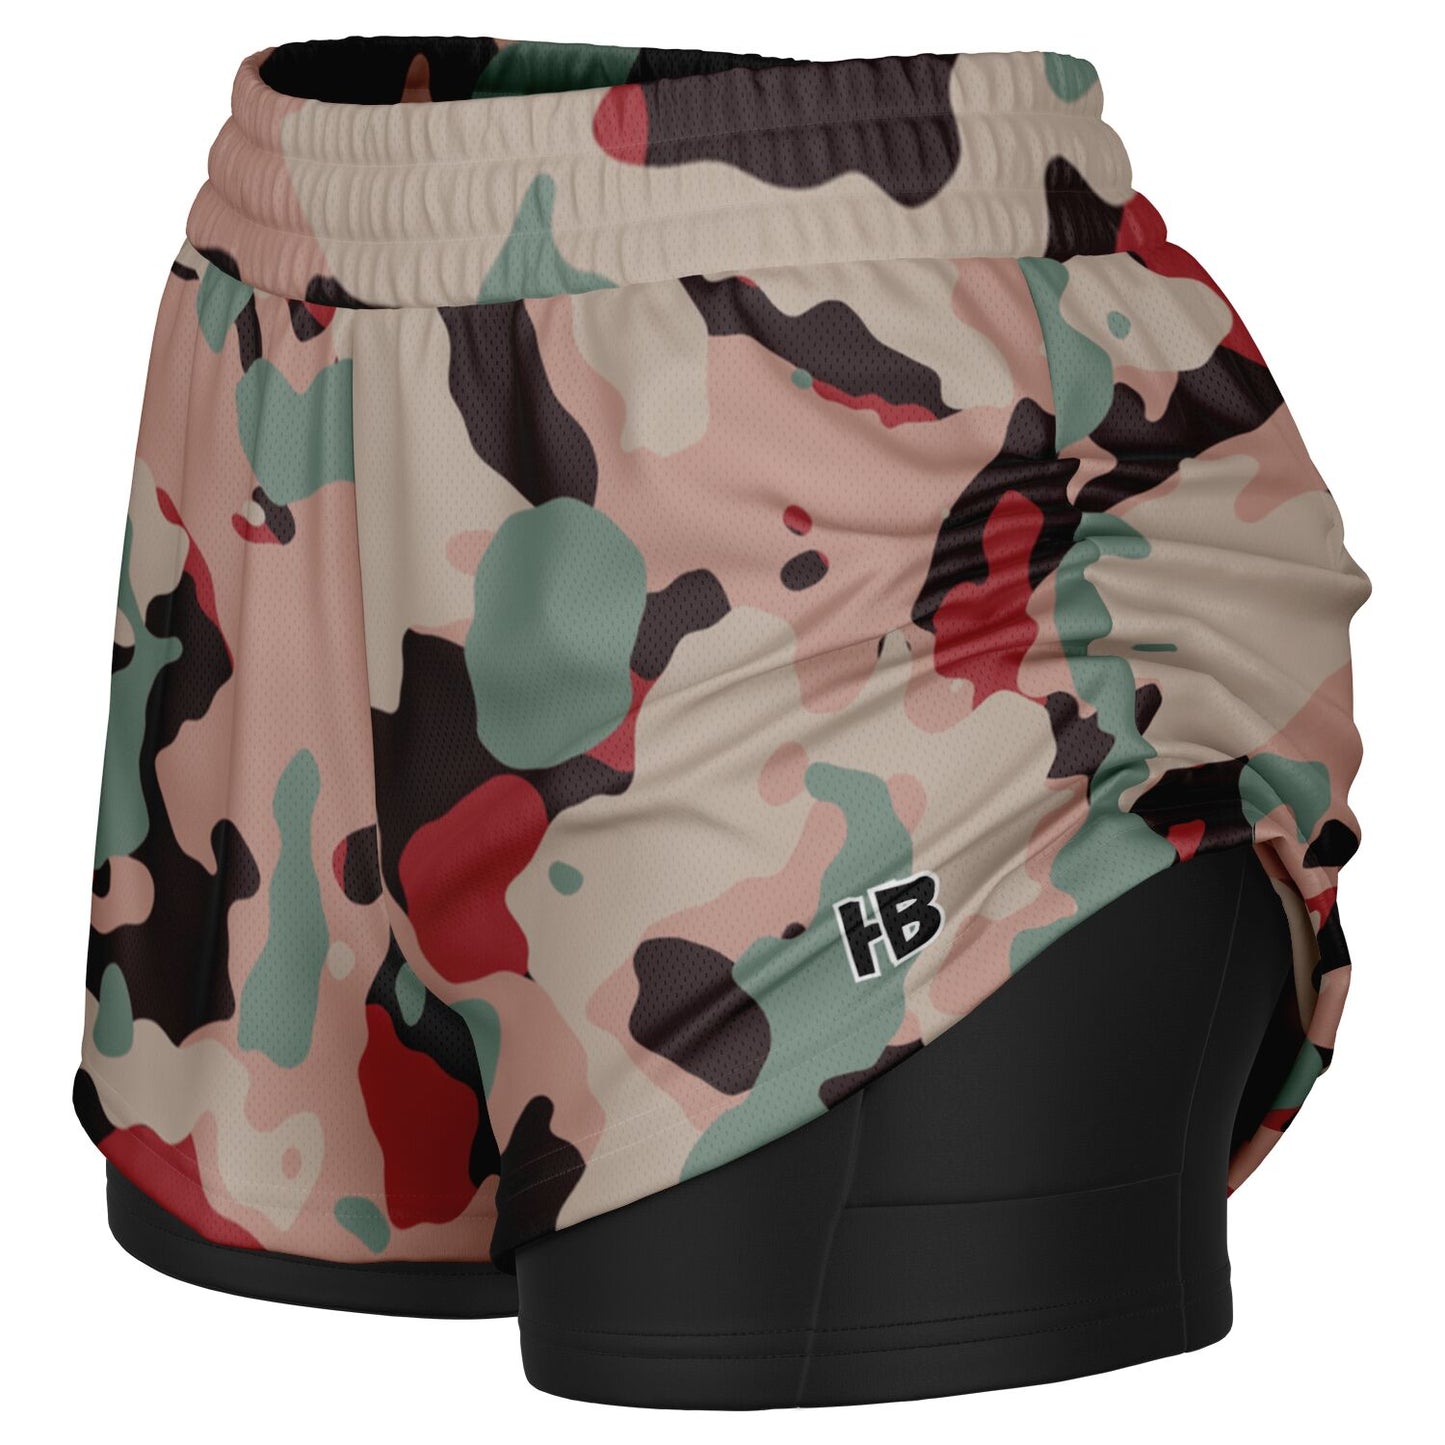 OuT tHeRe MeNs aNd WomEns 2 In 1 ShOrTs